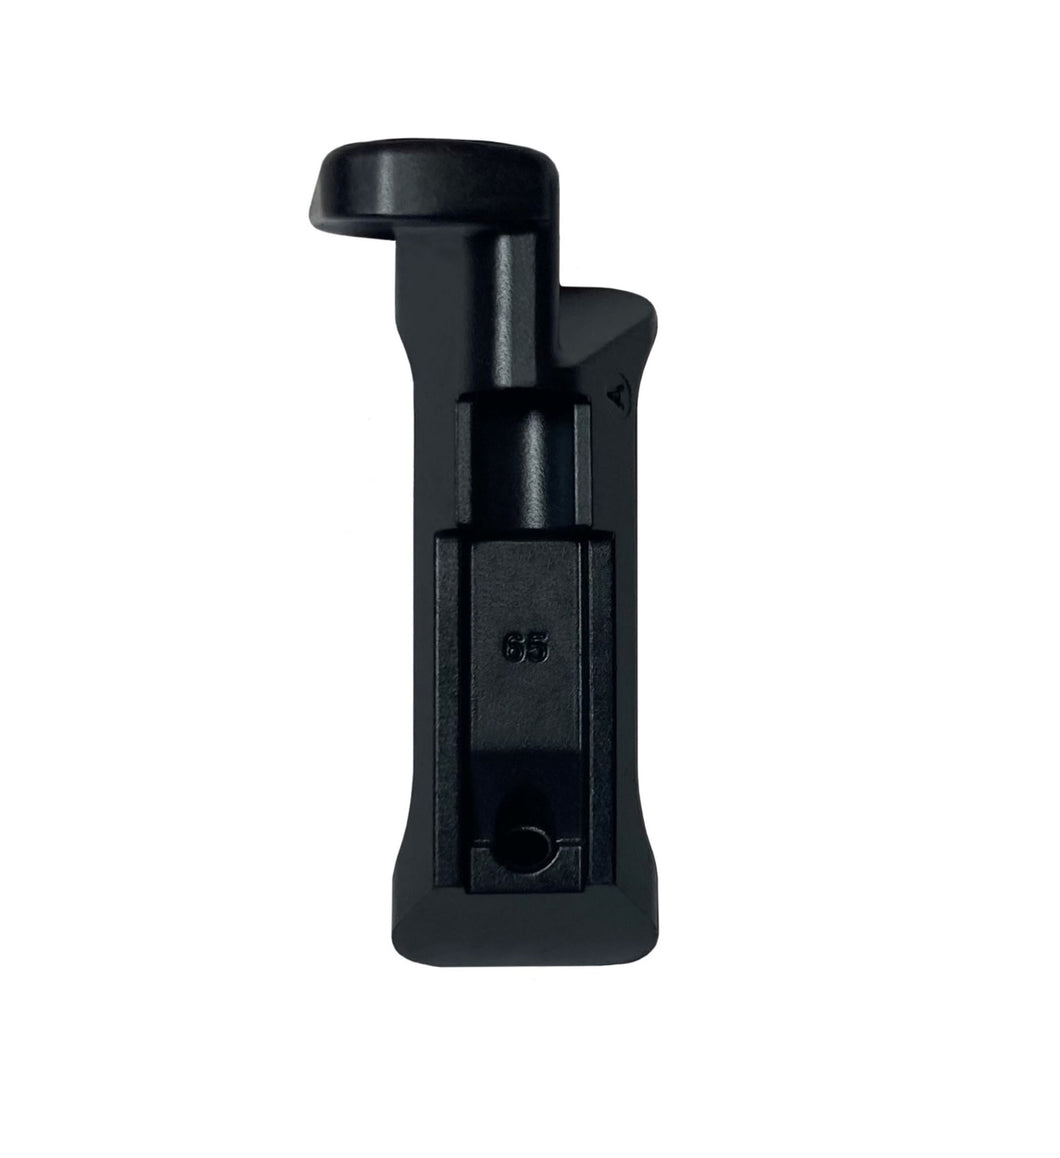 OFFSET P365 Micro Extended Magazine Release